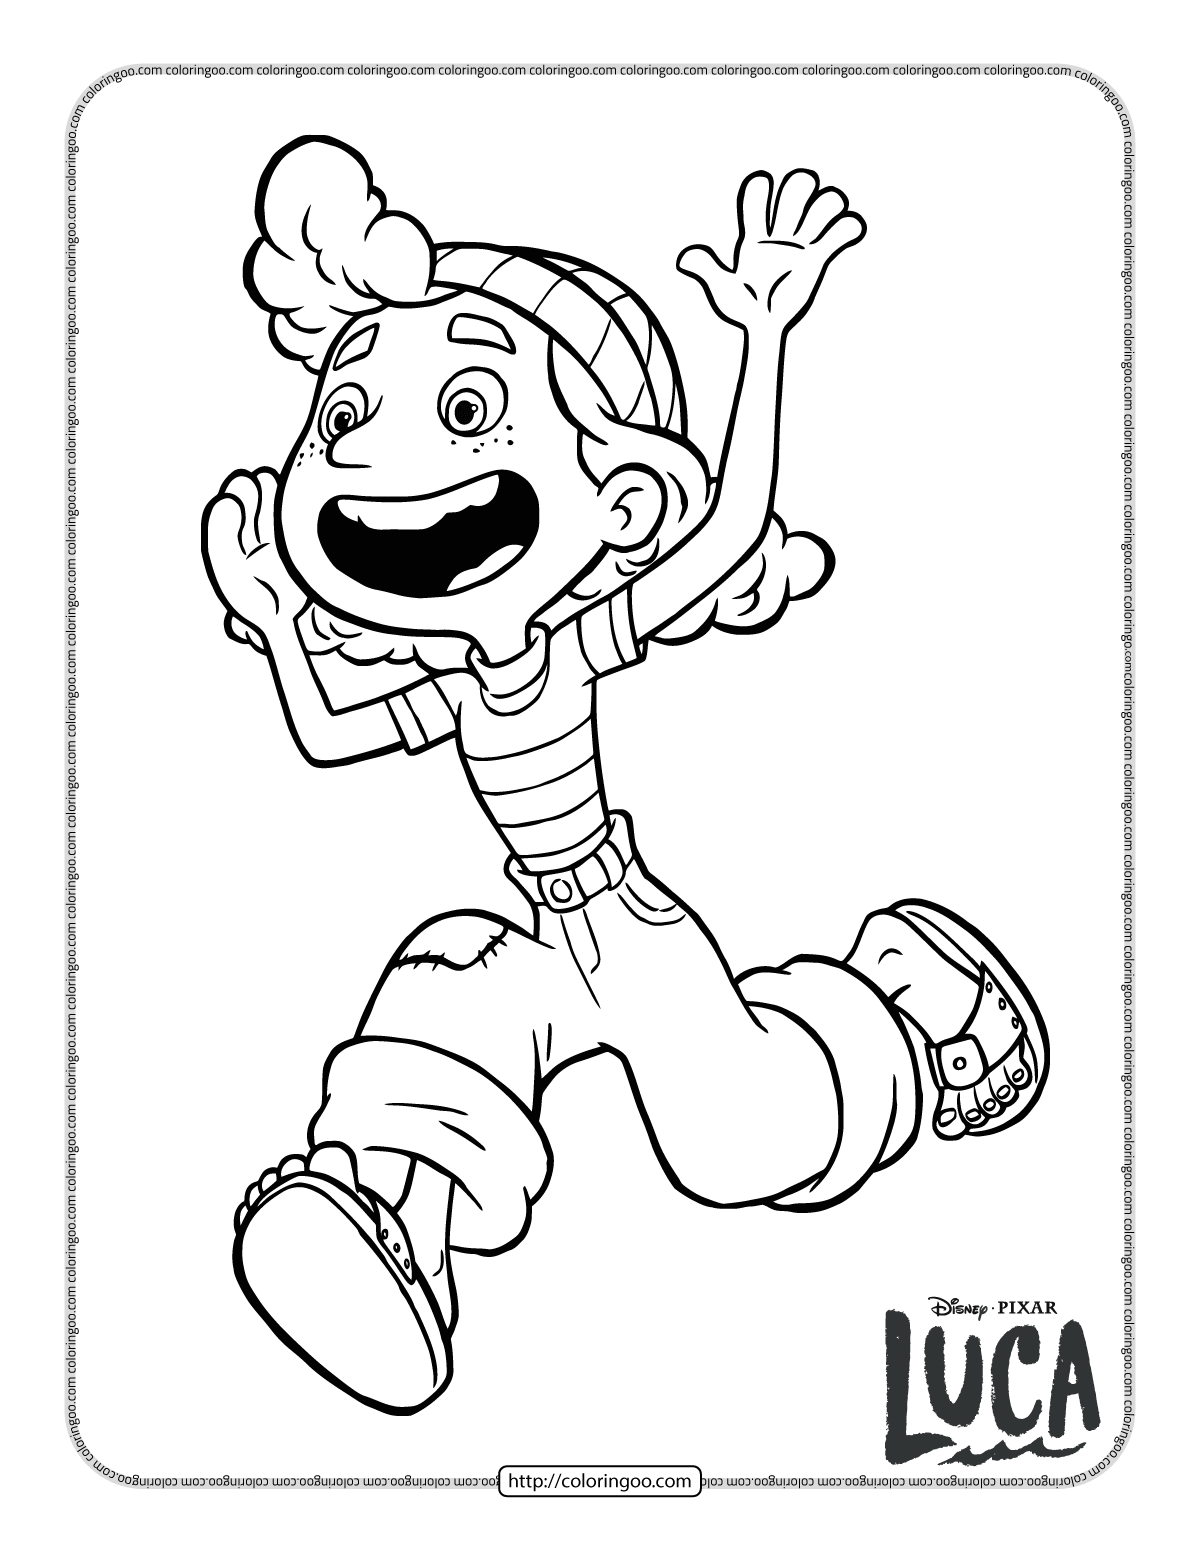 giulia from disney luca coloring page